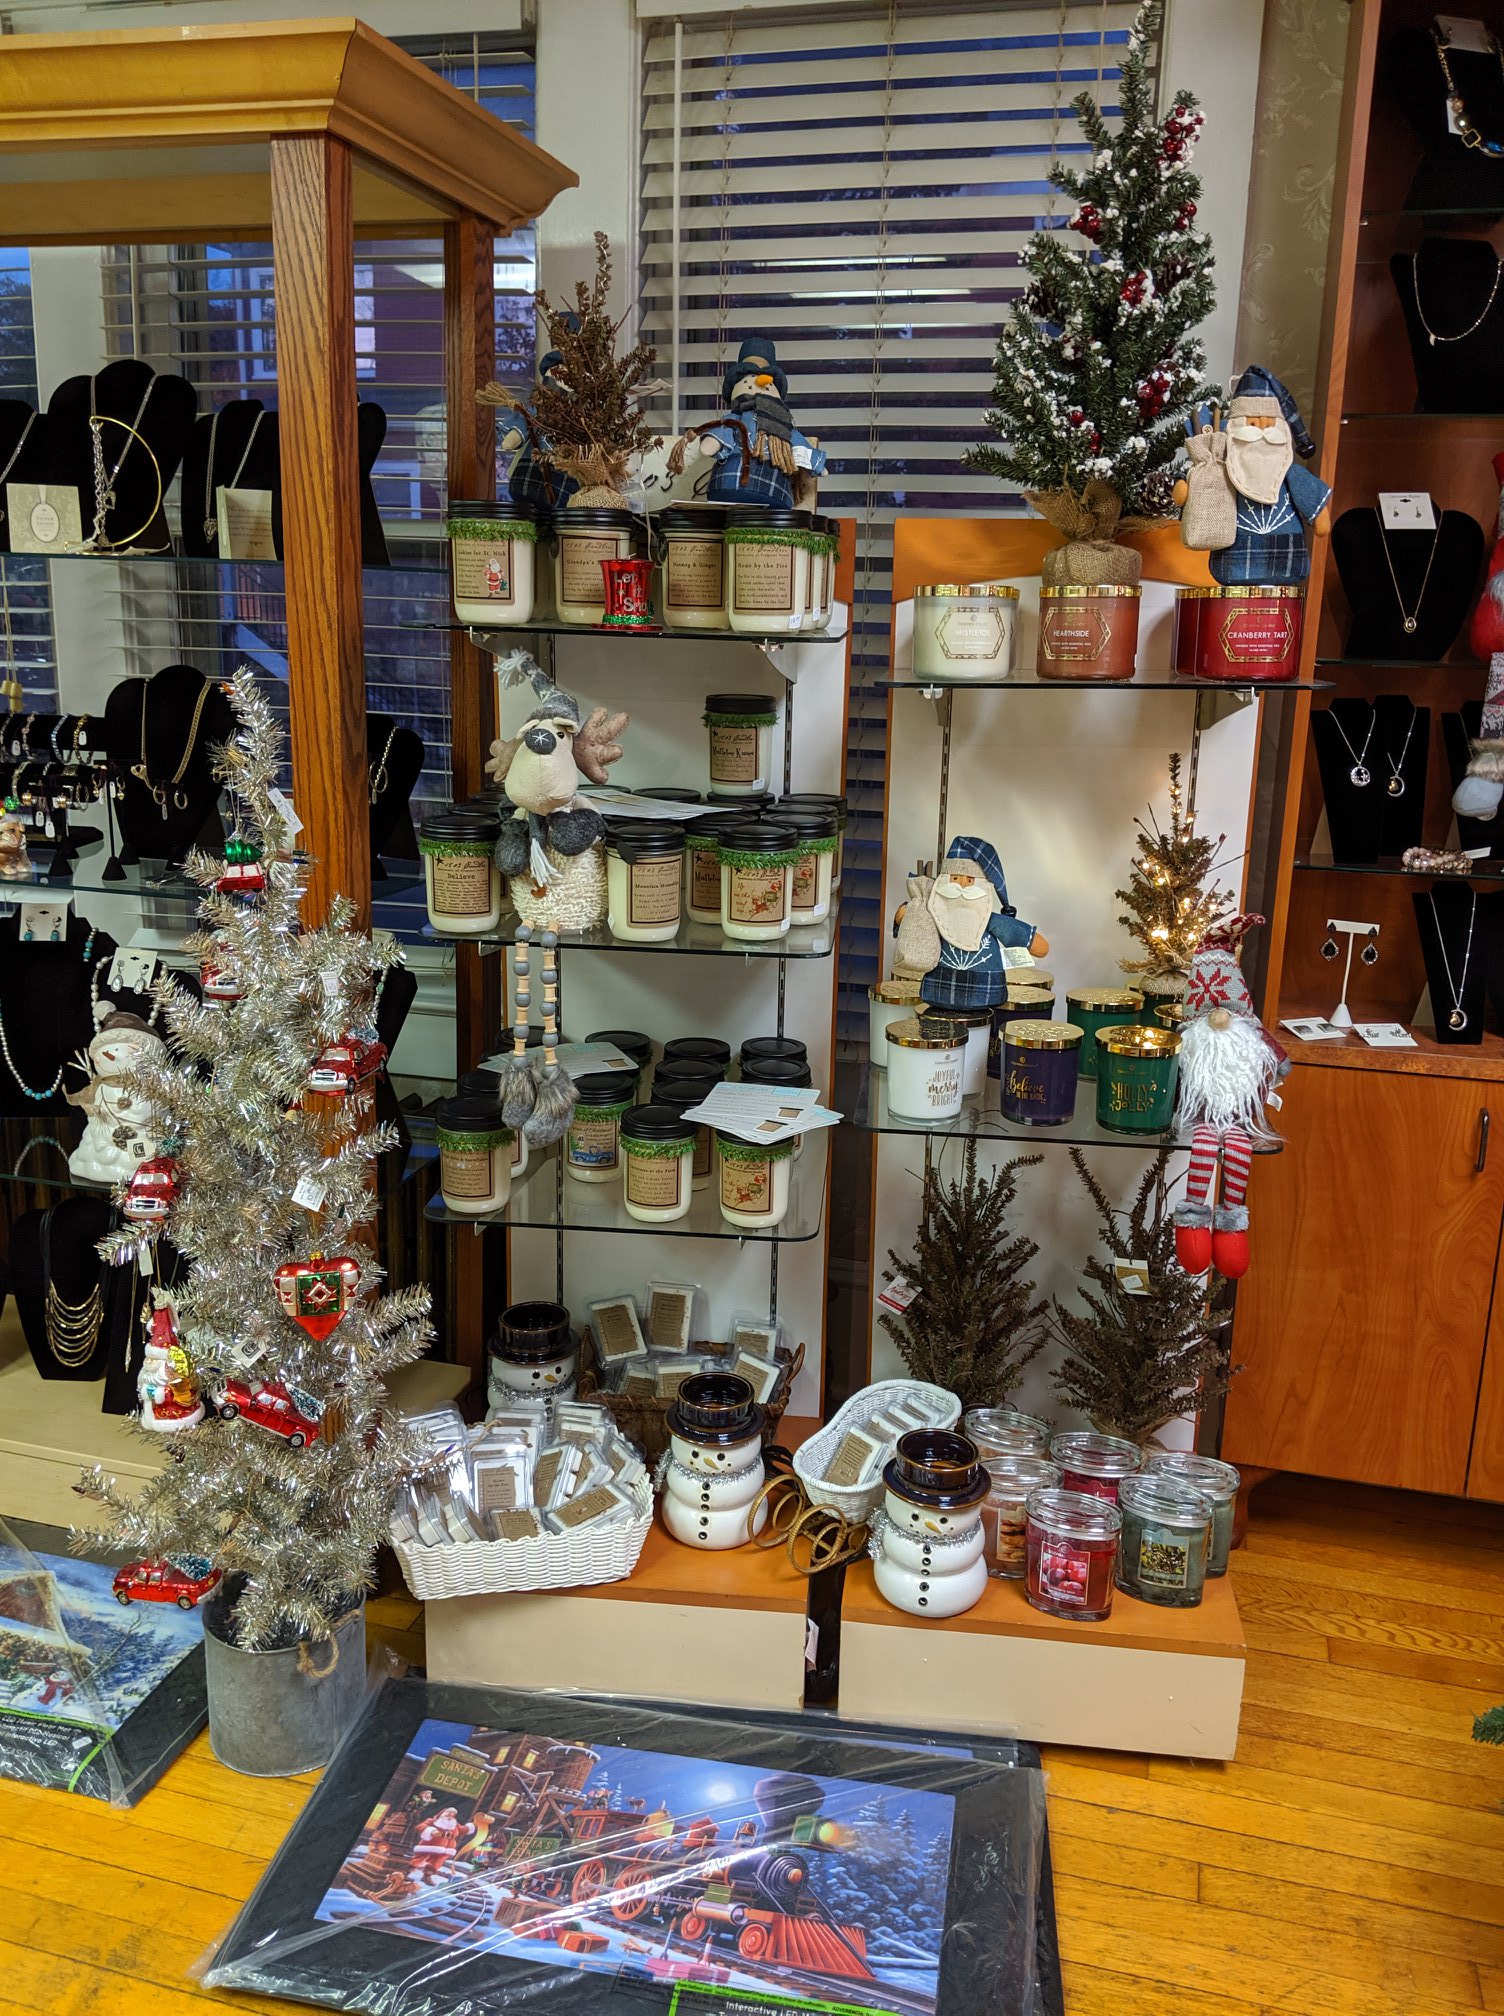 21 Mane and weezers gifts 21 Main St, Netcong New Jersey 07857